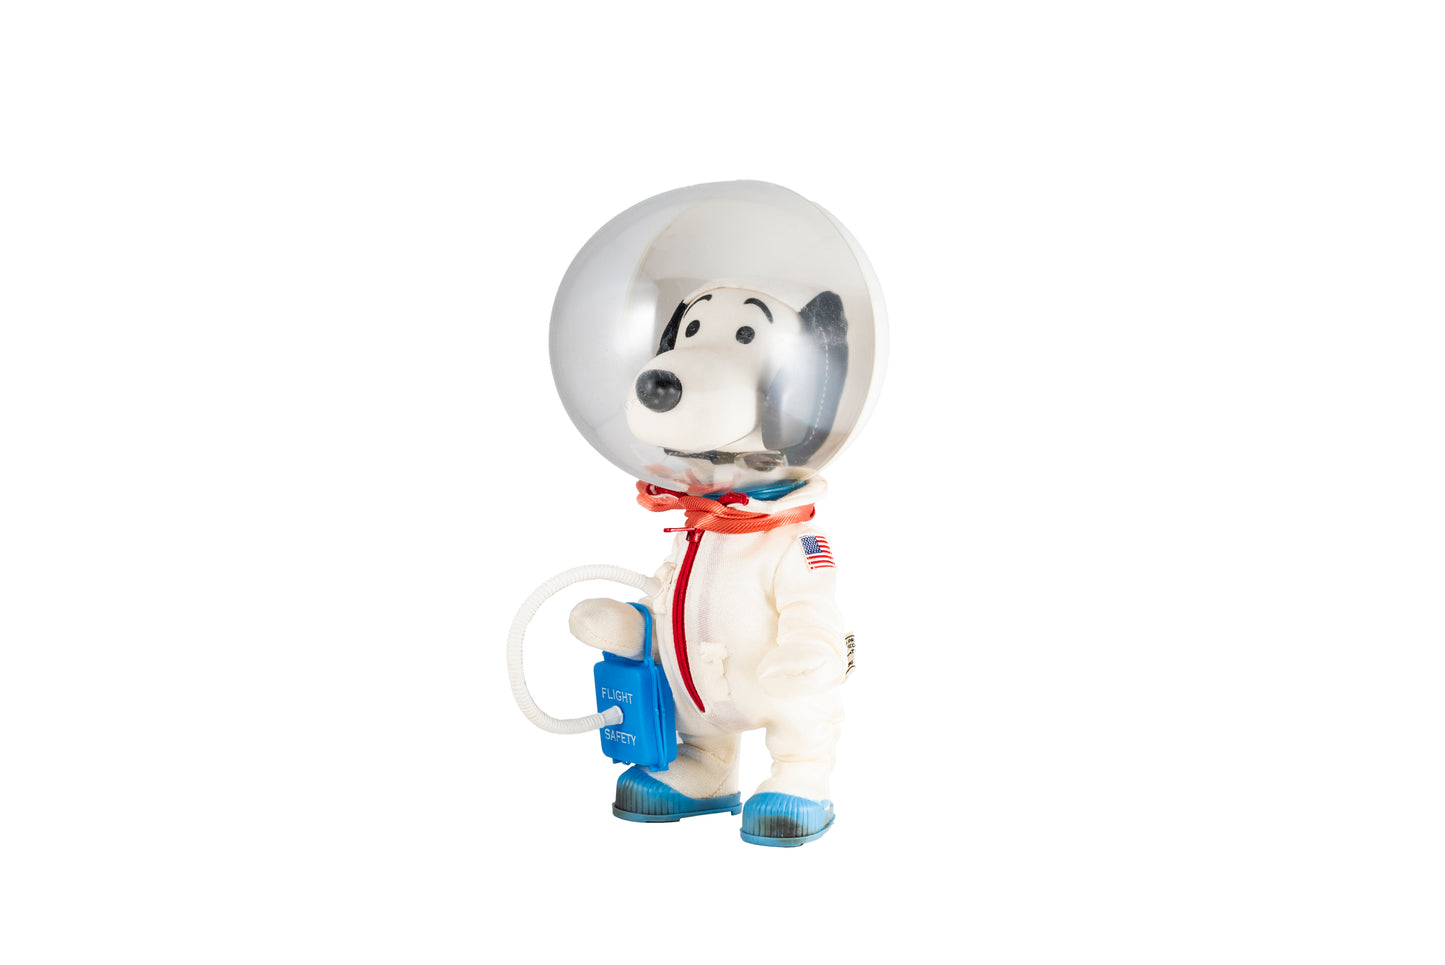 Snoopy 'Astronaut' Doll With Box